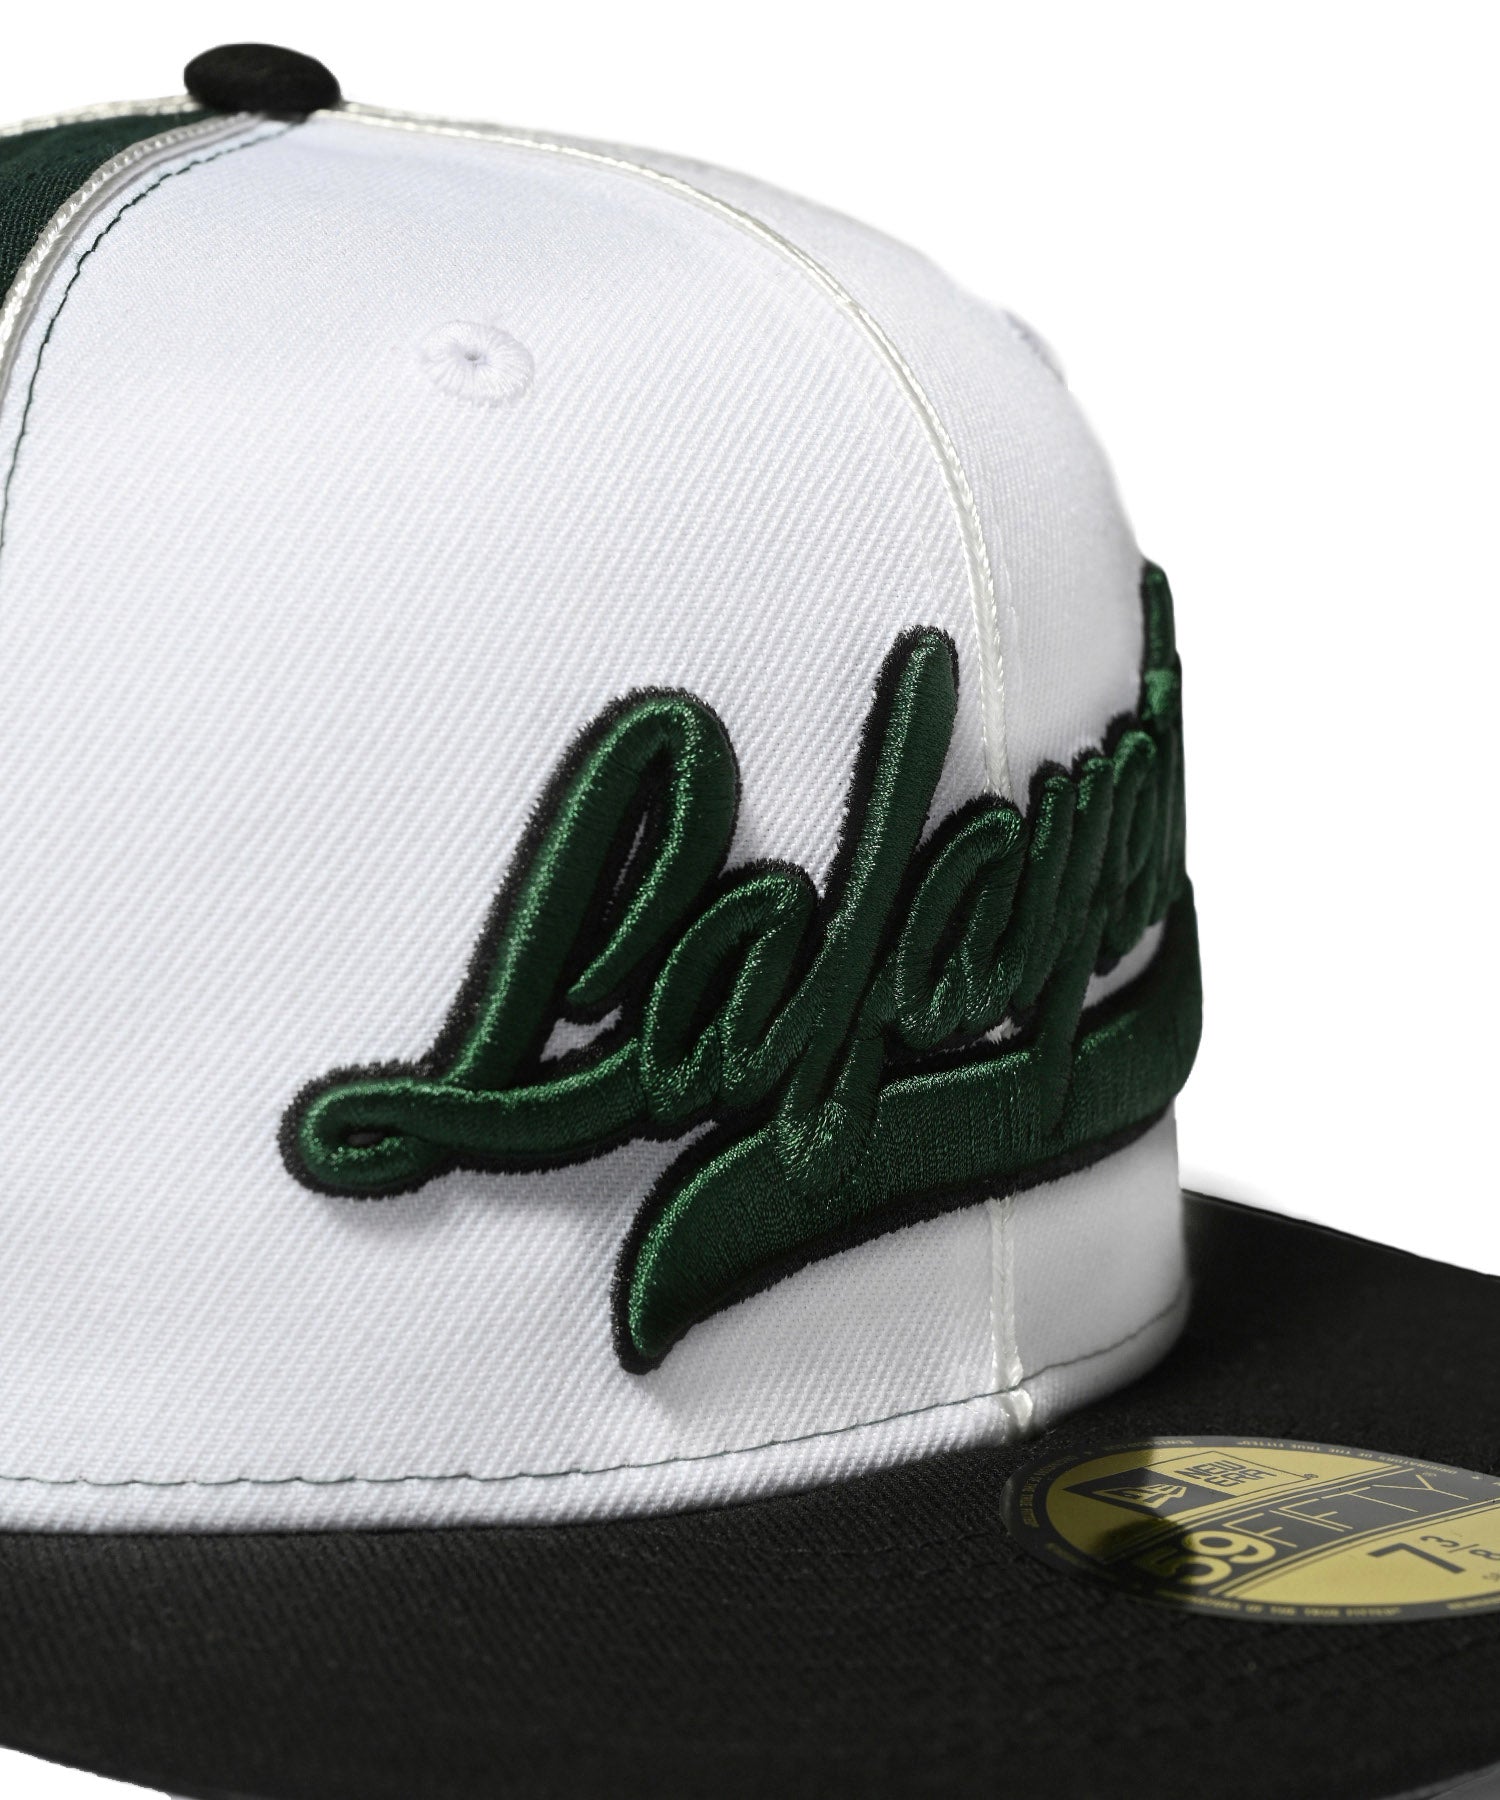 LFYT × NEW ERA 3TONE TEAM LOGO 59FIFTY FITTED CAP LA221408 WHITE×GREEN